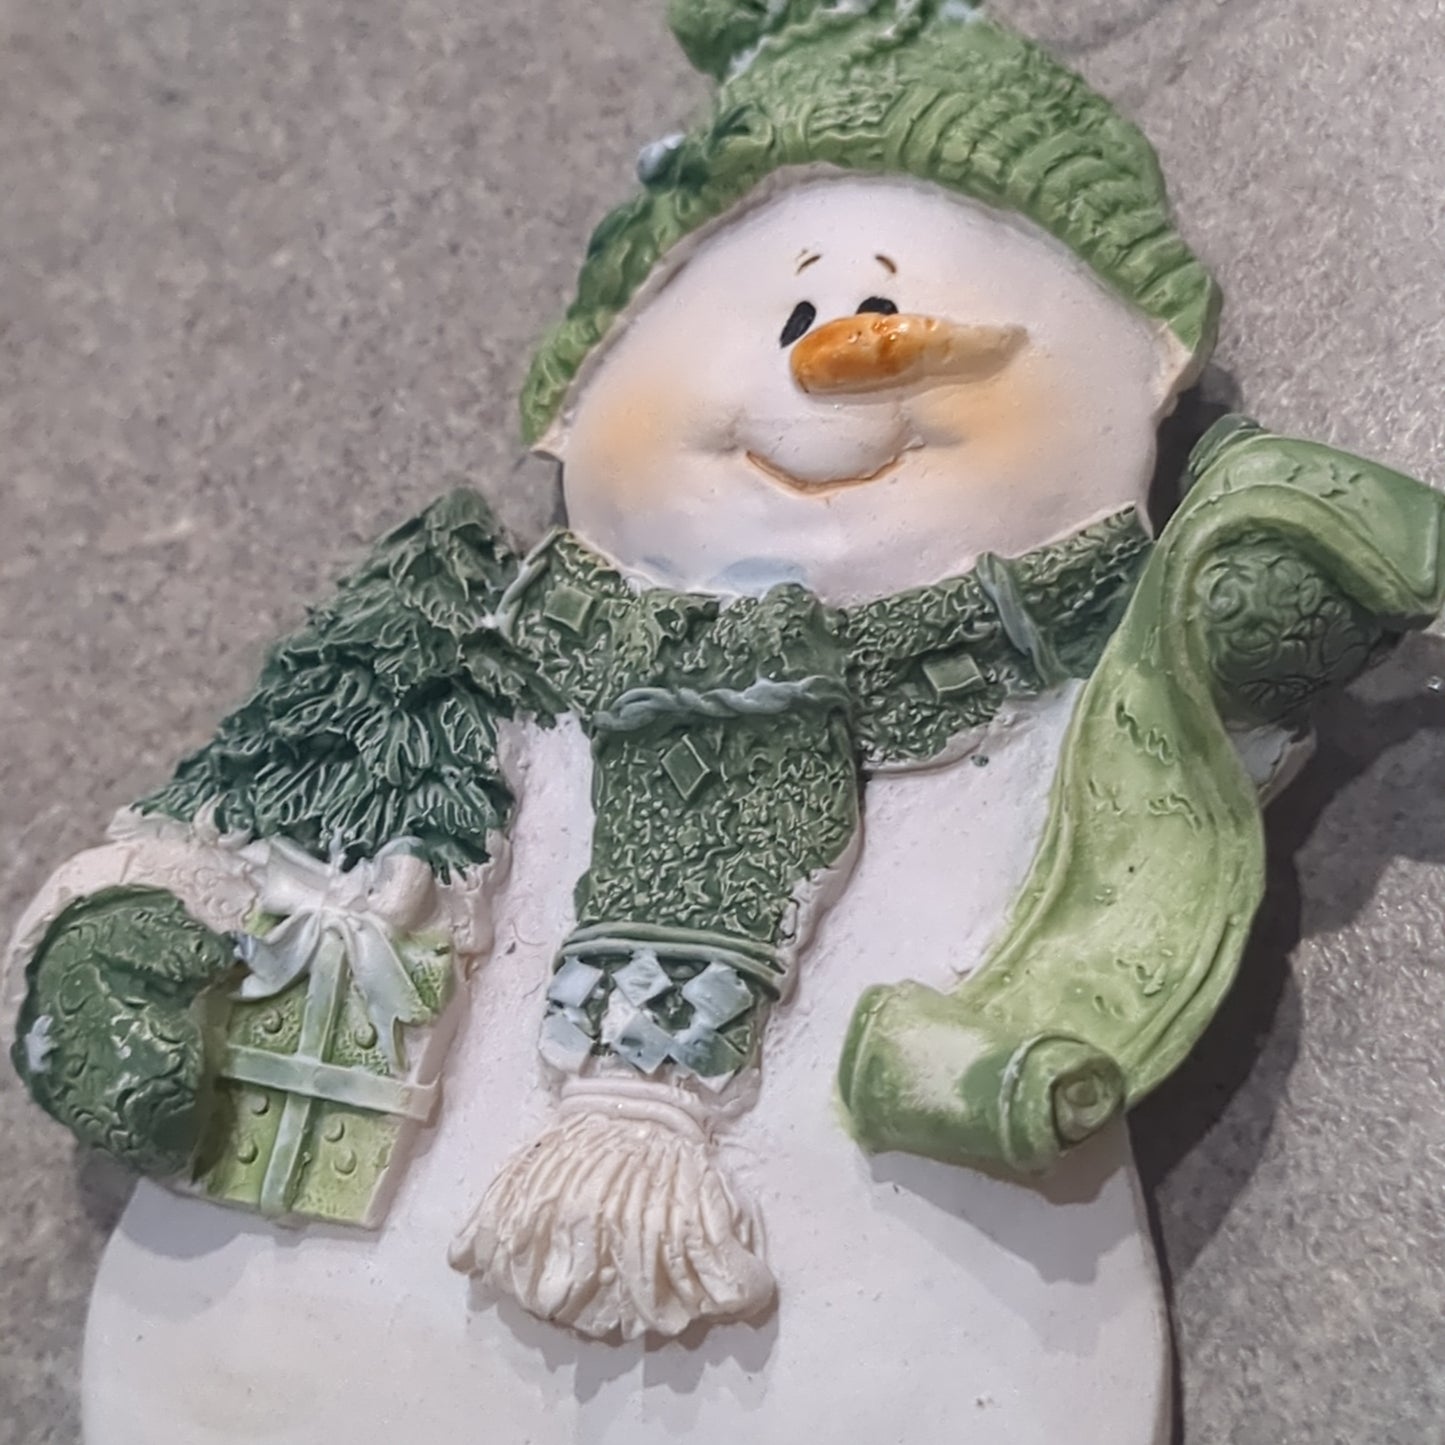 Polycrylic snowman ornament with a scroll and gift - green